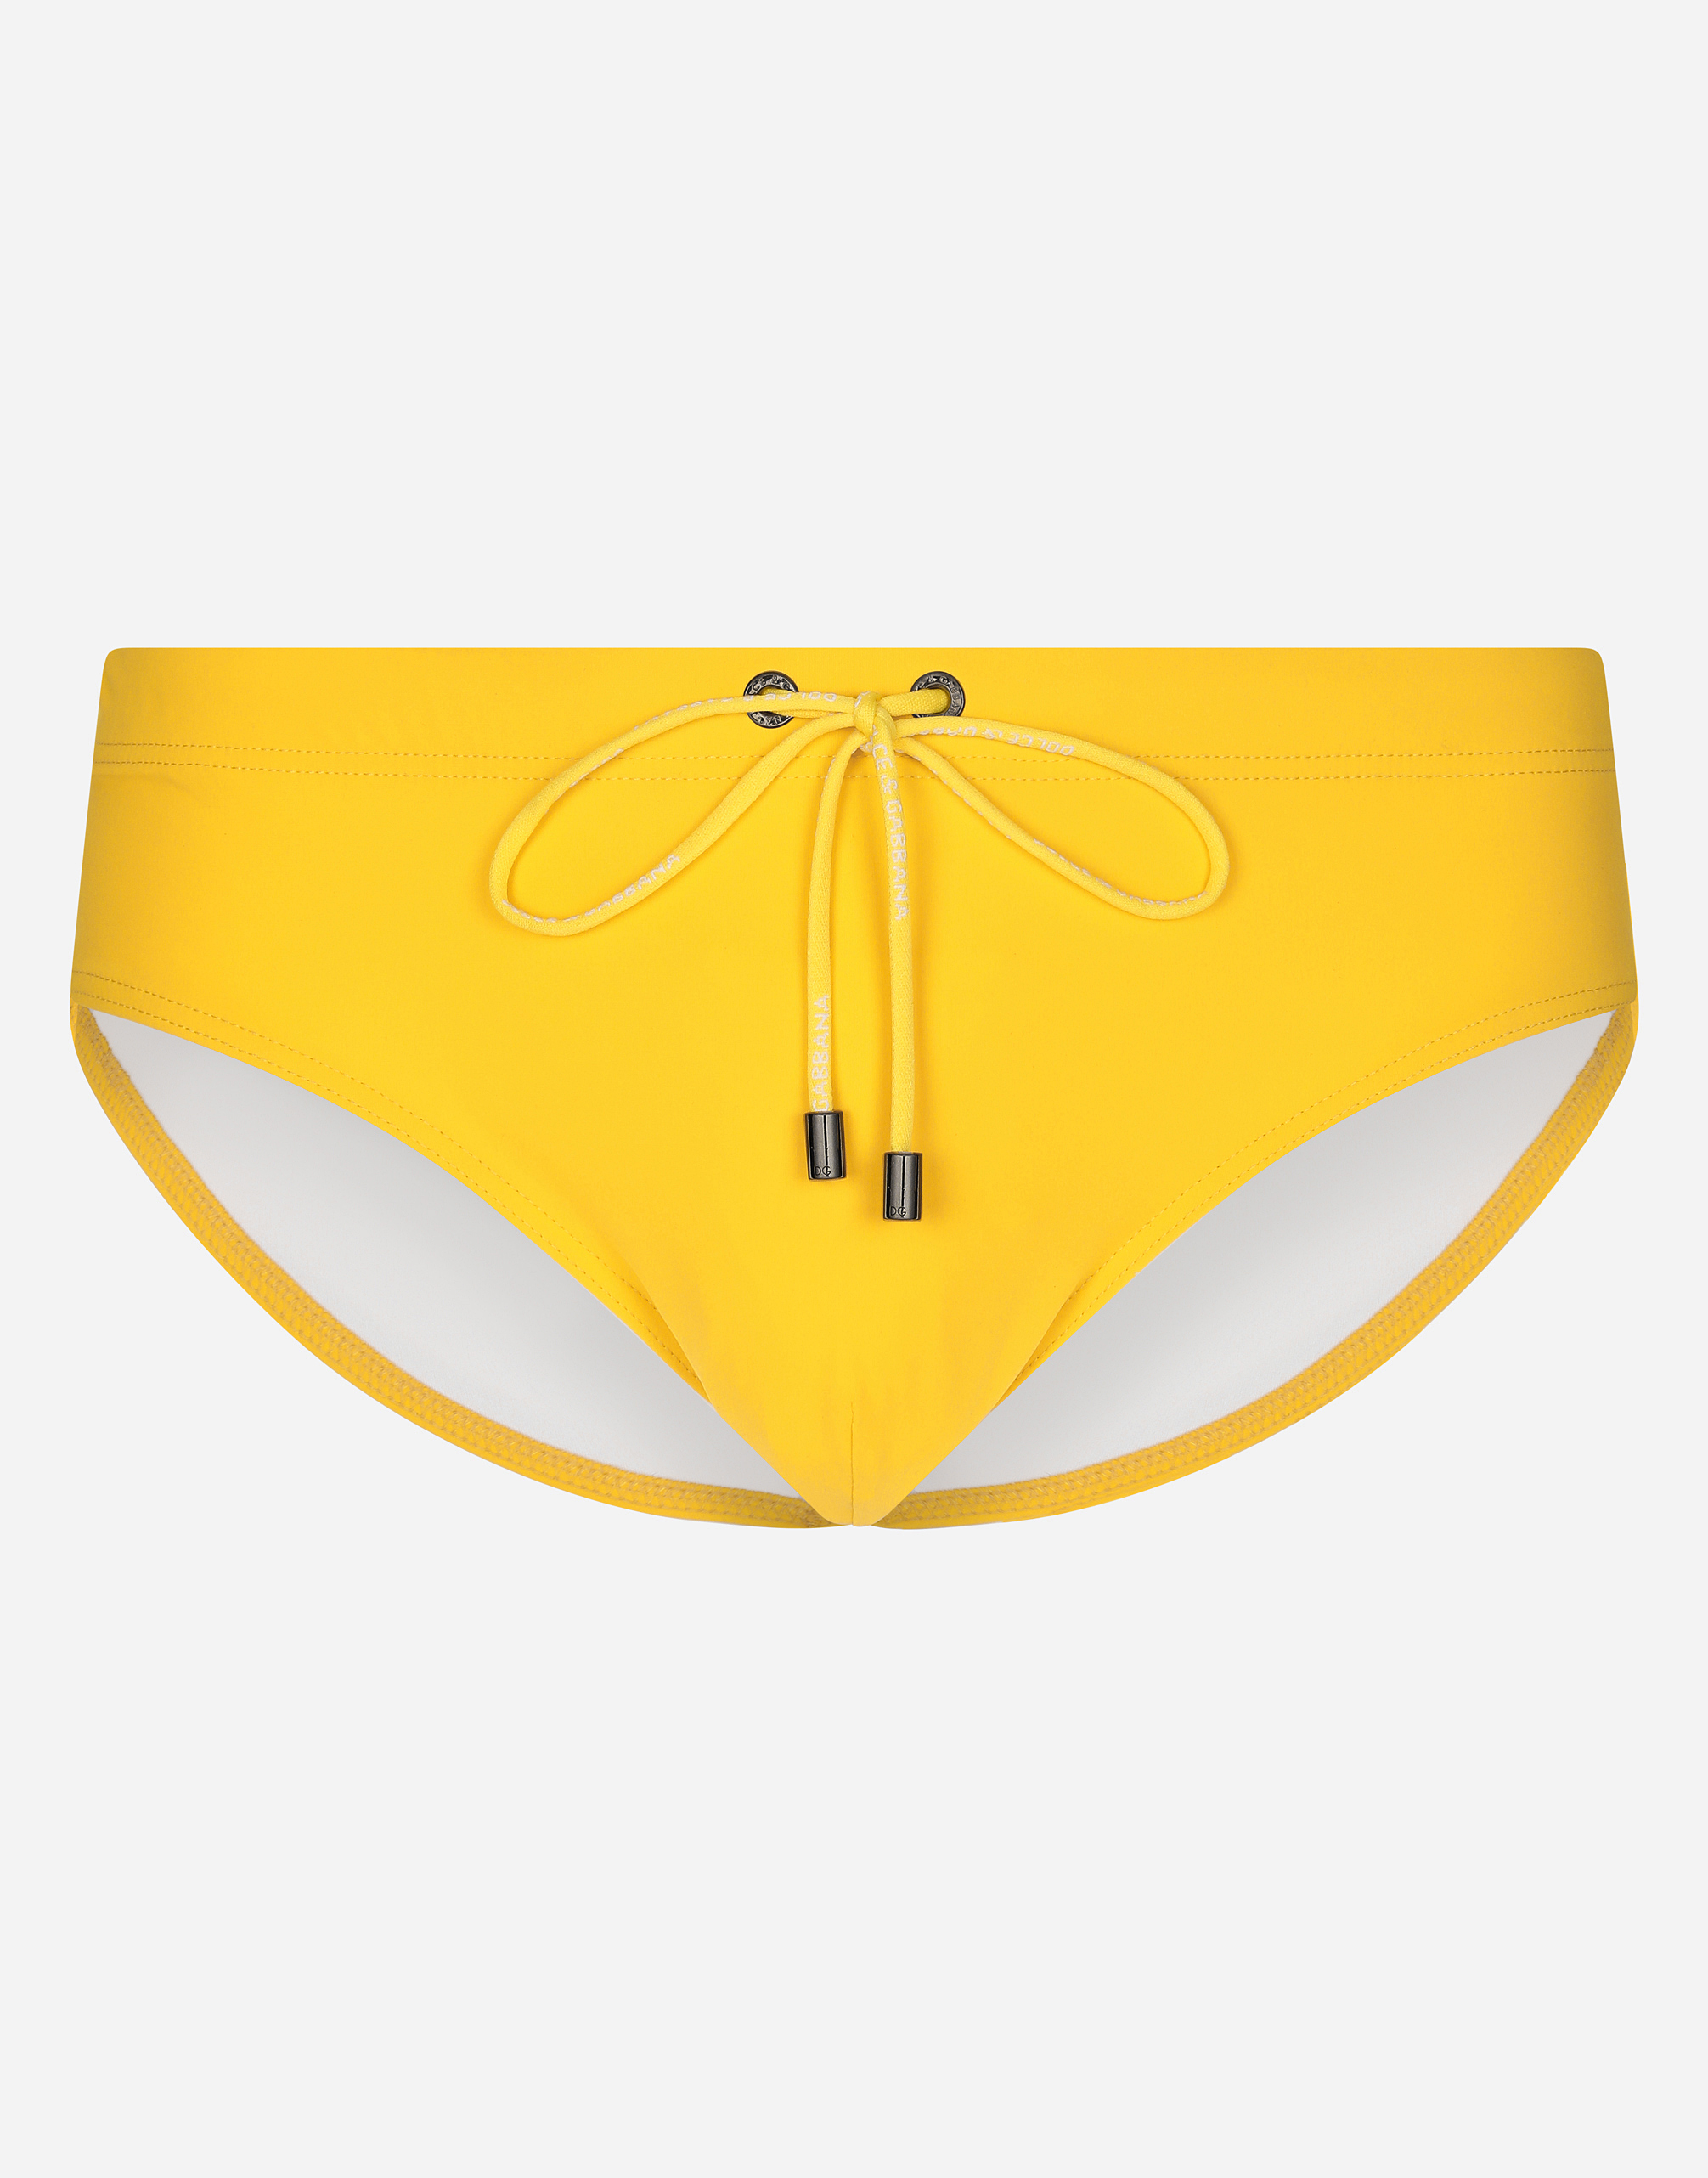 Swim briefs with high-cut leg and branded rear waistband in Yellow